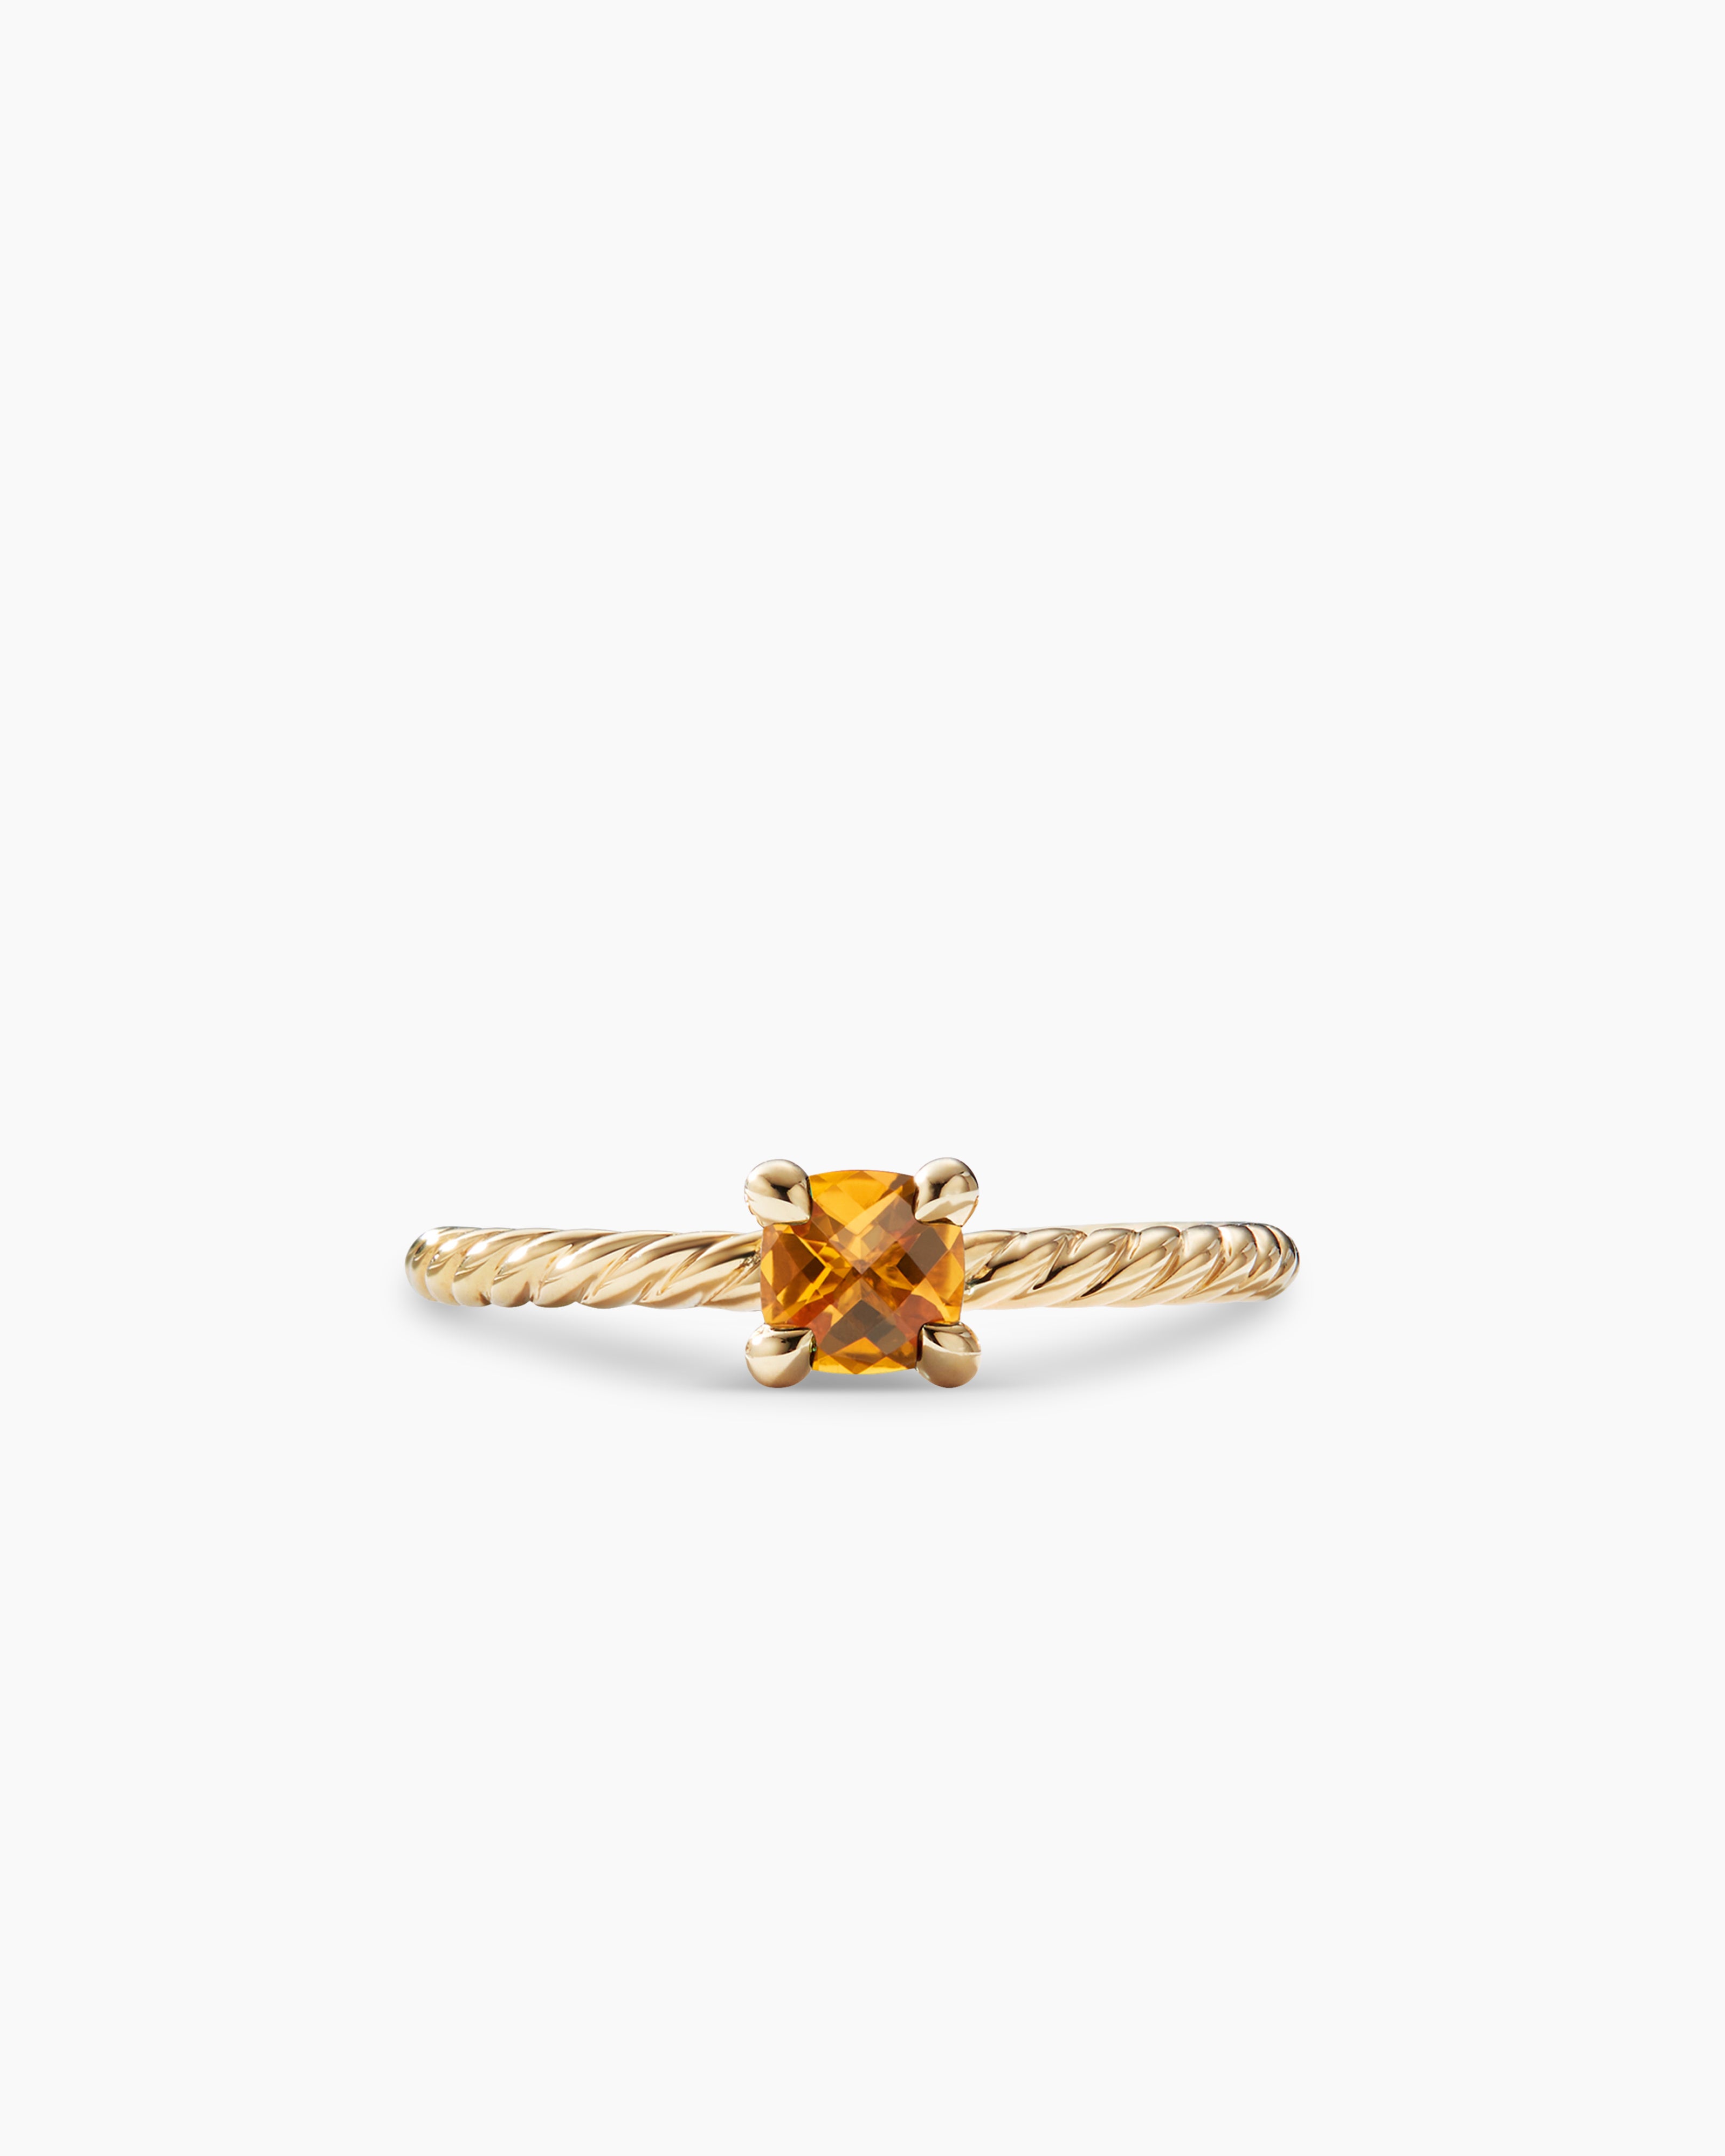 Albion Ring in Sterling Silver with 18K Yellow Gold and Diamonds, 11mm